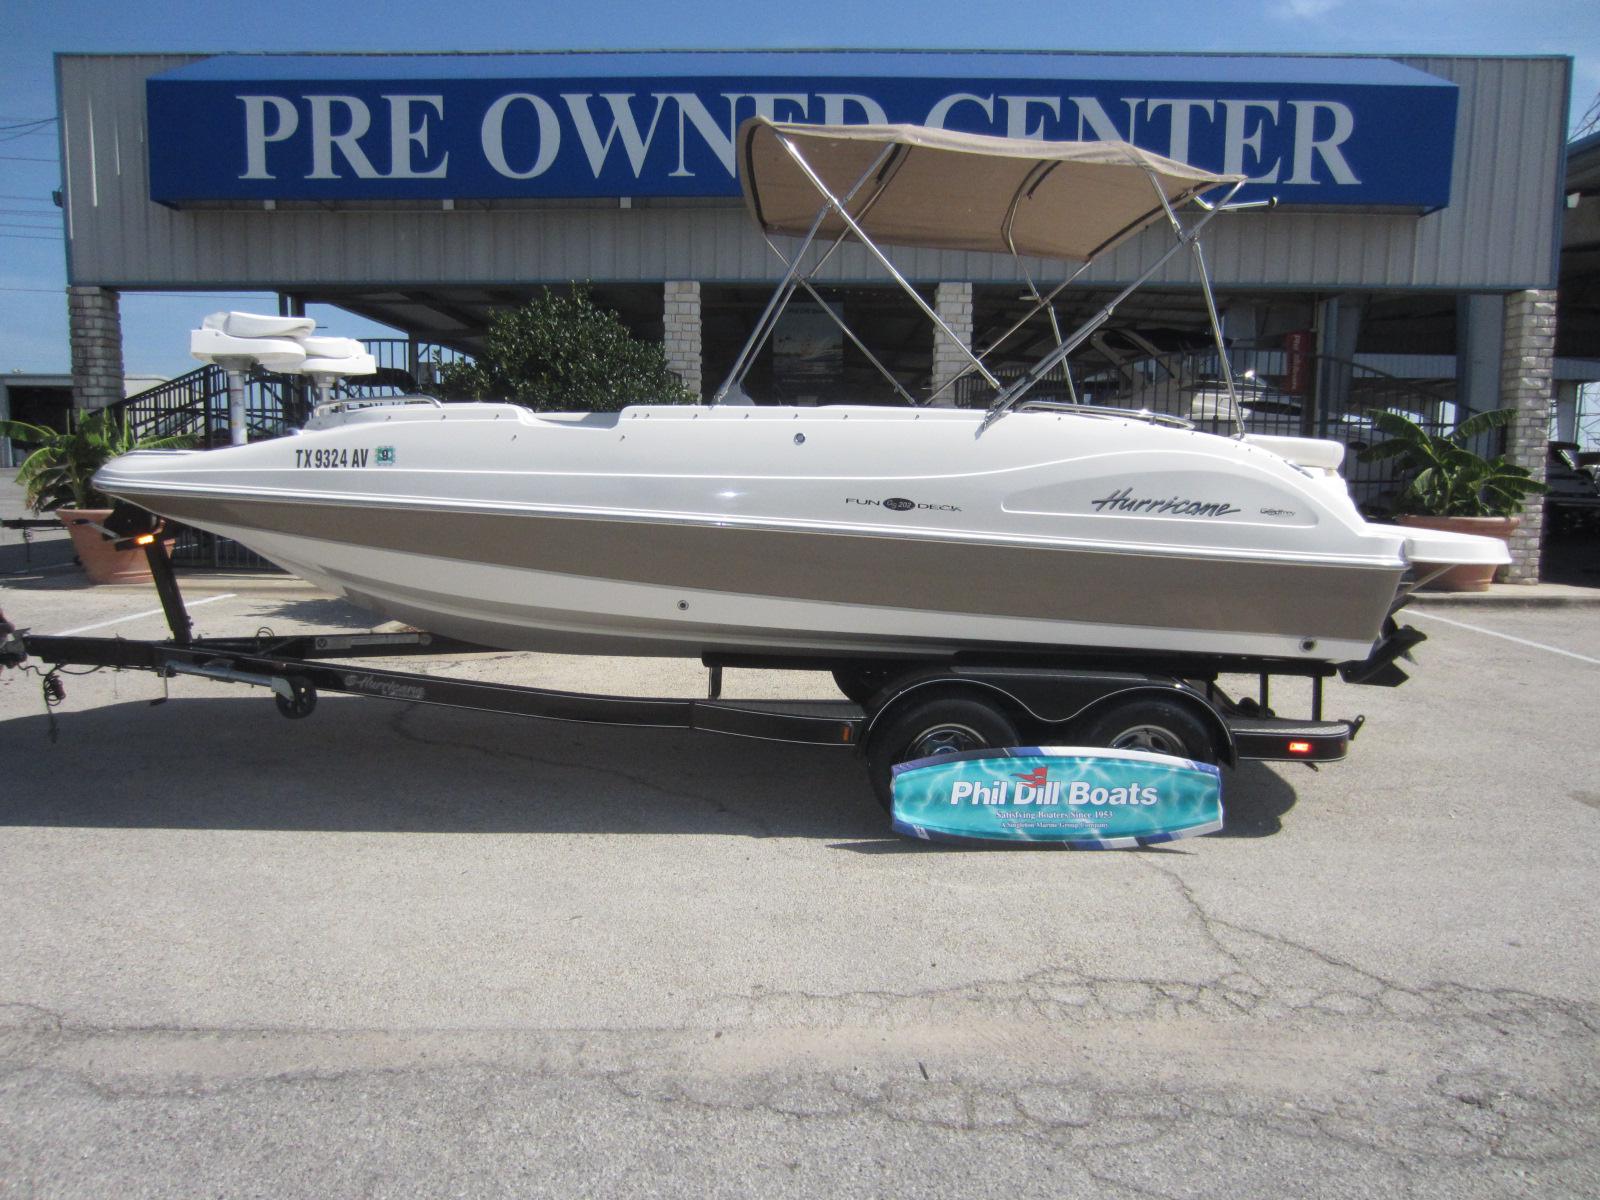 Used Hurricane deck boat boats for sale - Page 4 of 8 ...